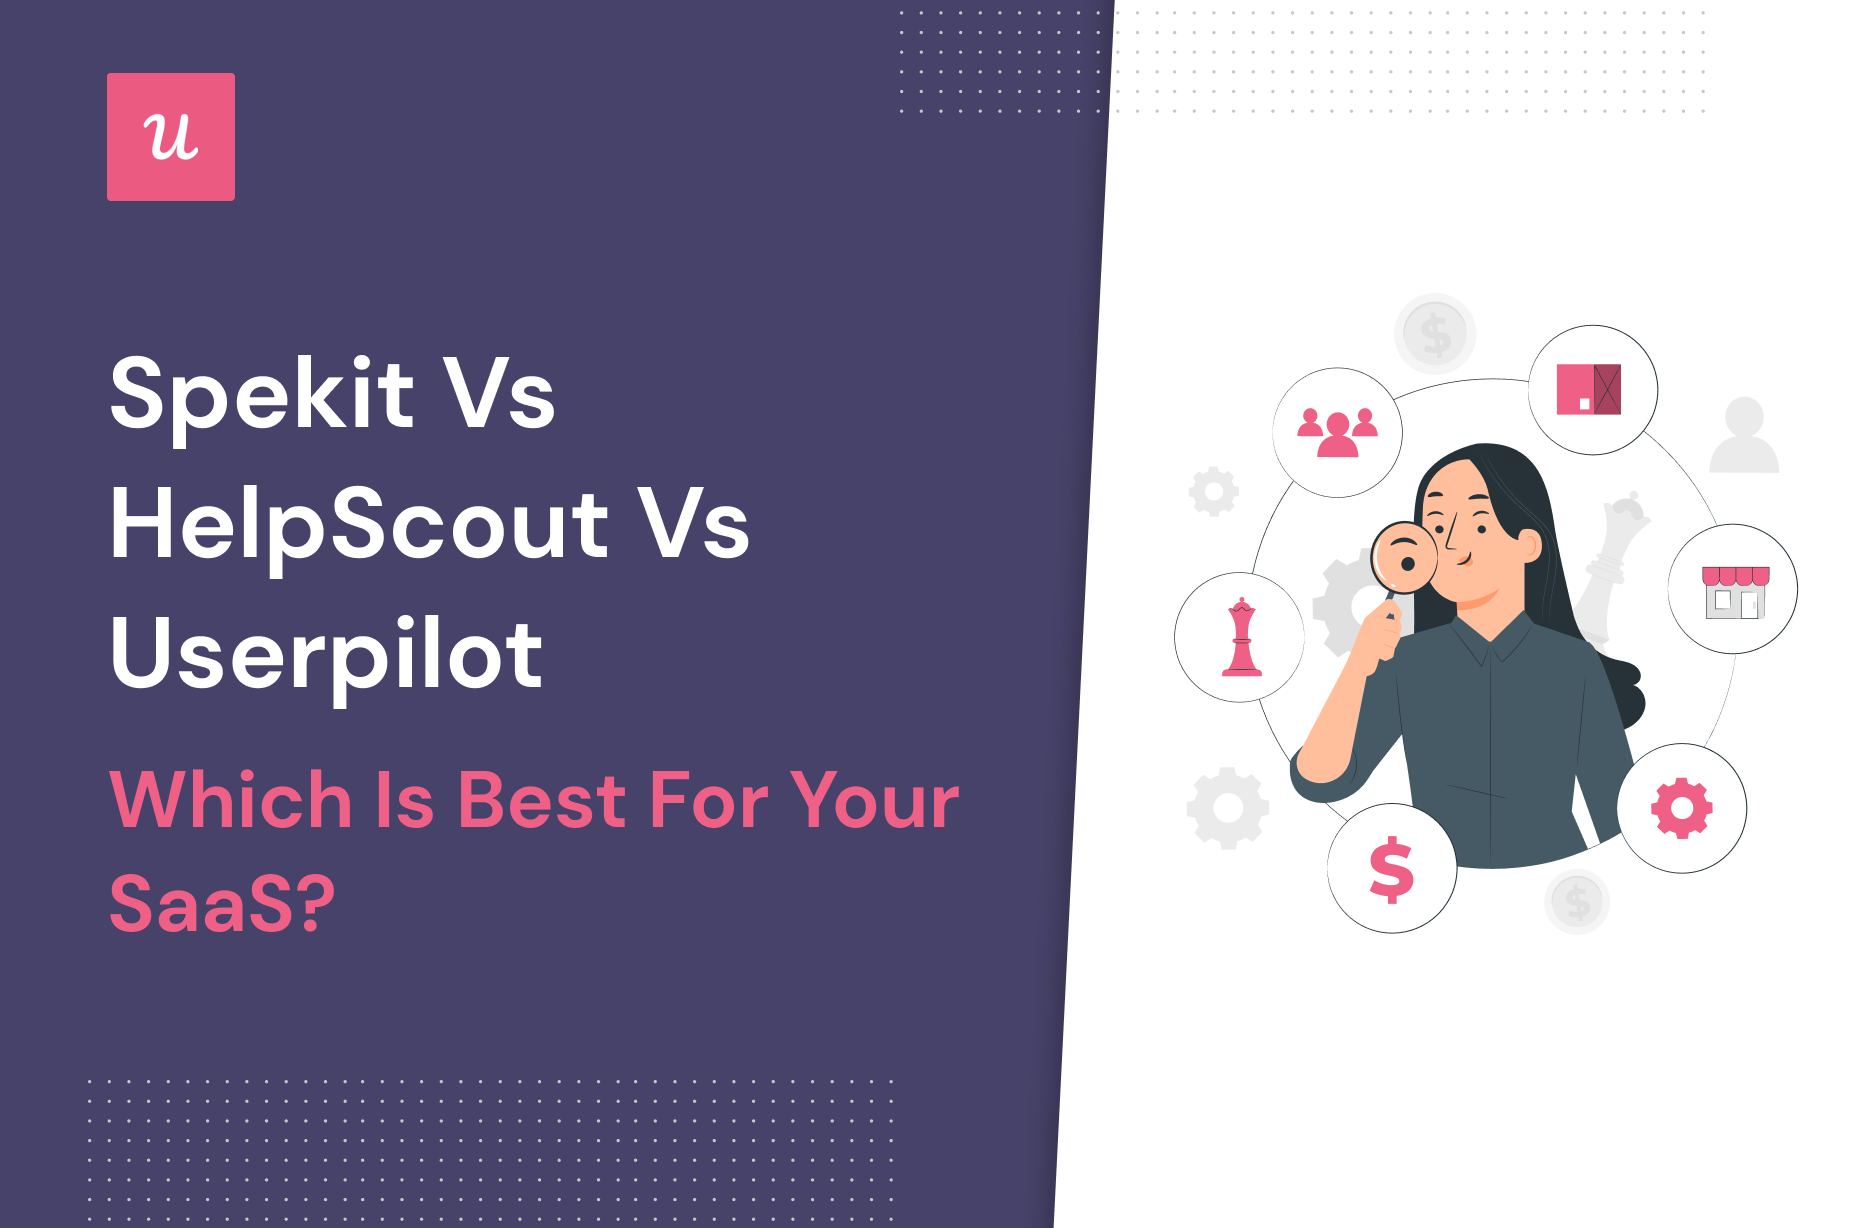 Spekit vs HelpScout vs Userpilot – Which is Best for Your SaaS